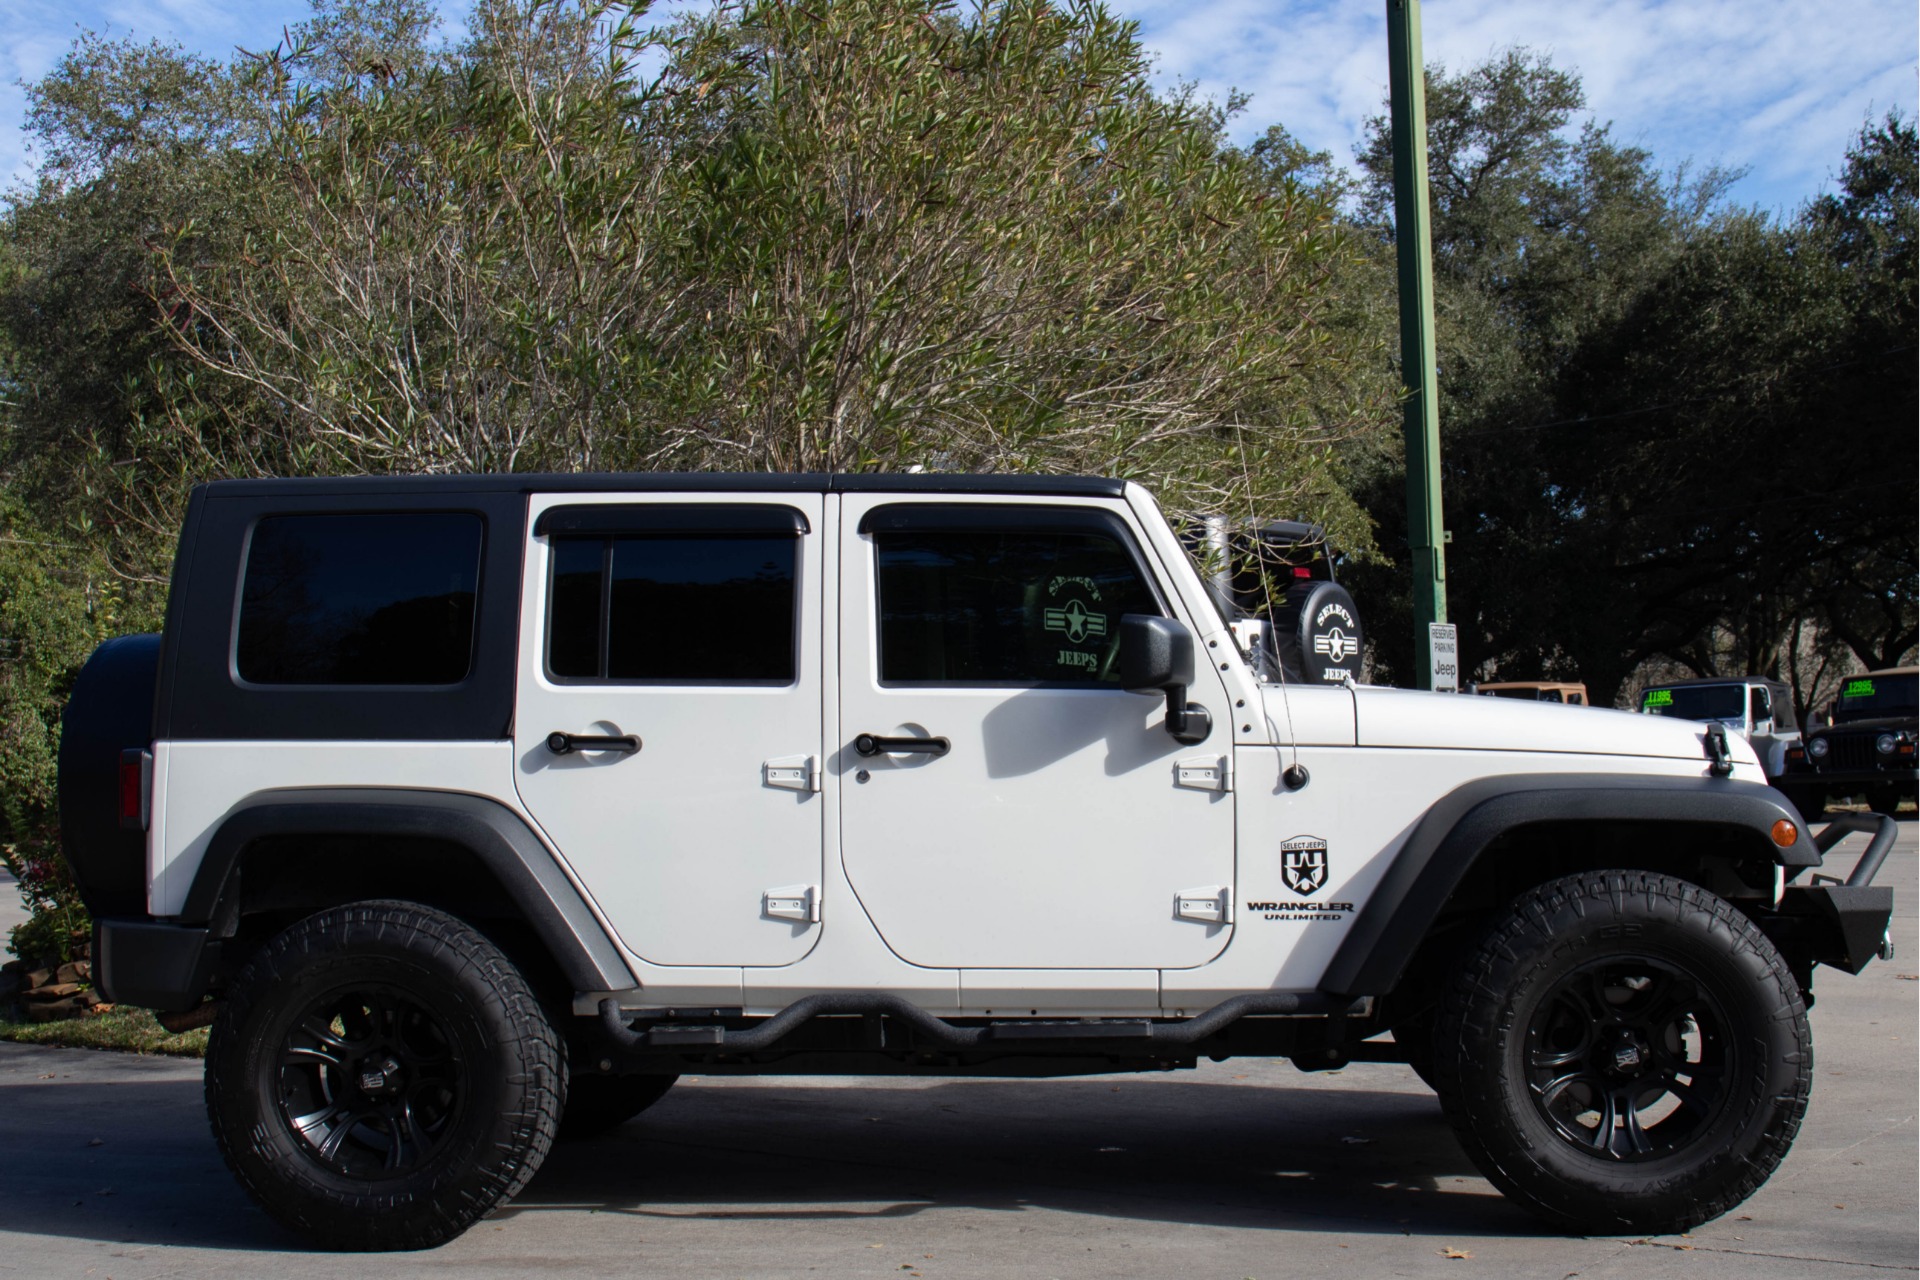 Used 2008 Jeep Wrangler Unlimited X  For Sale 18 995 